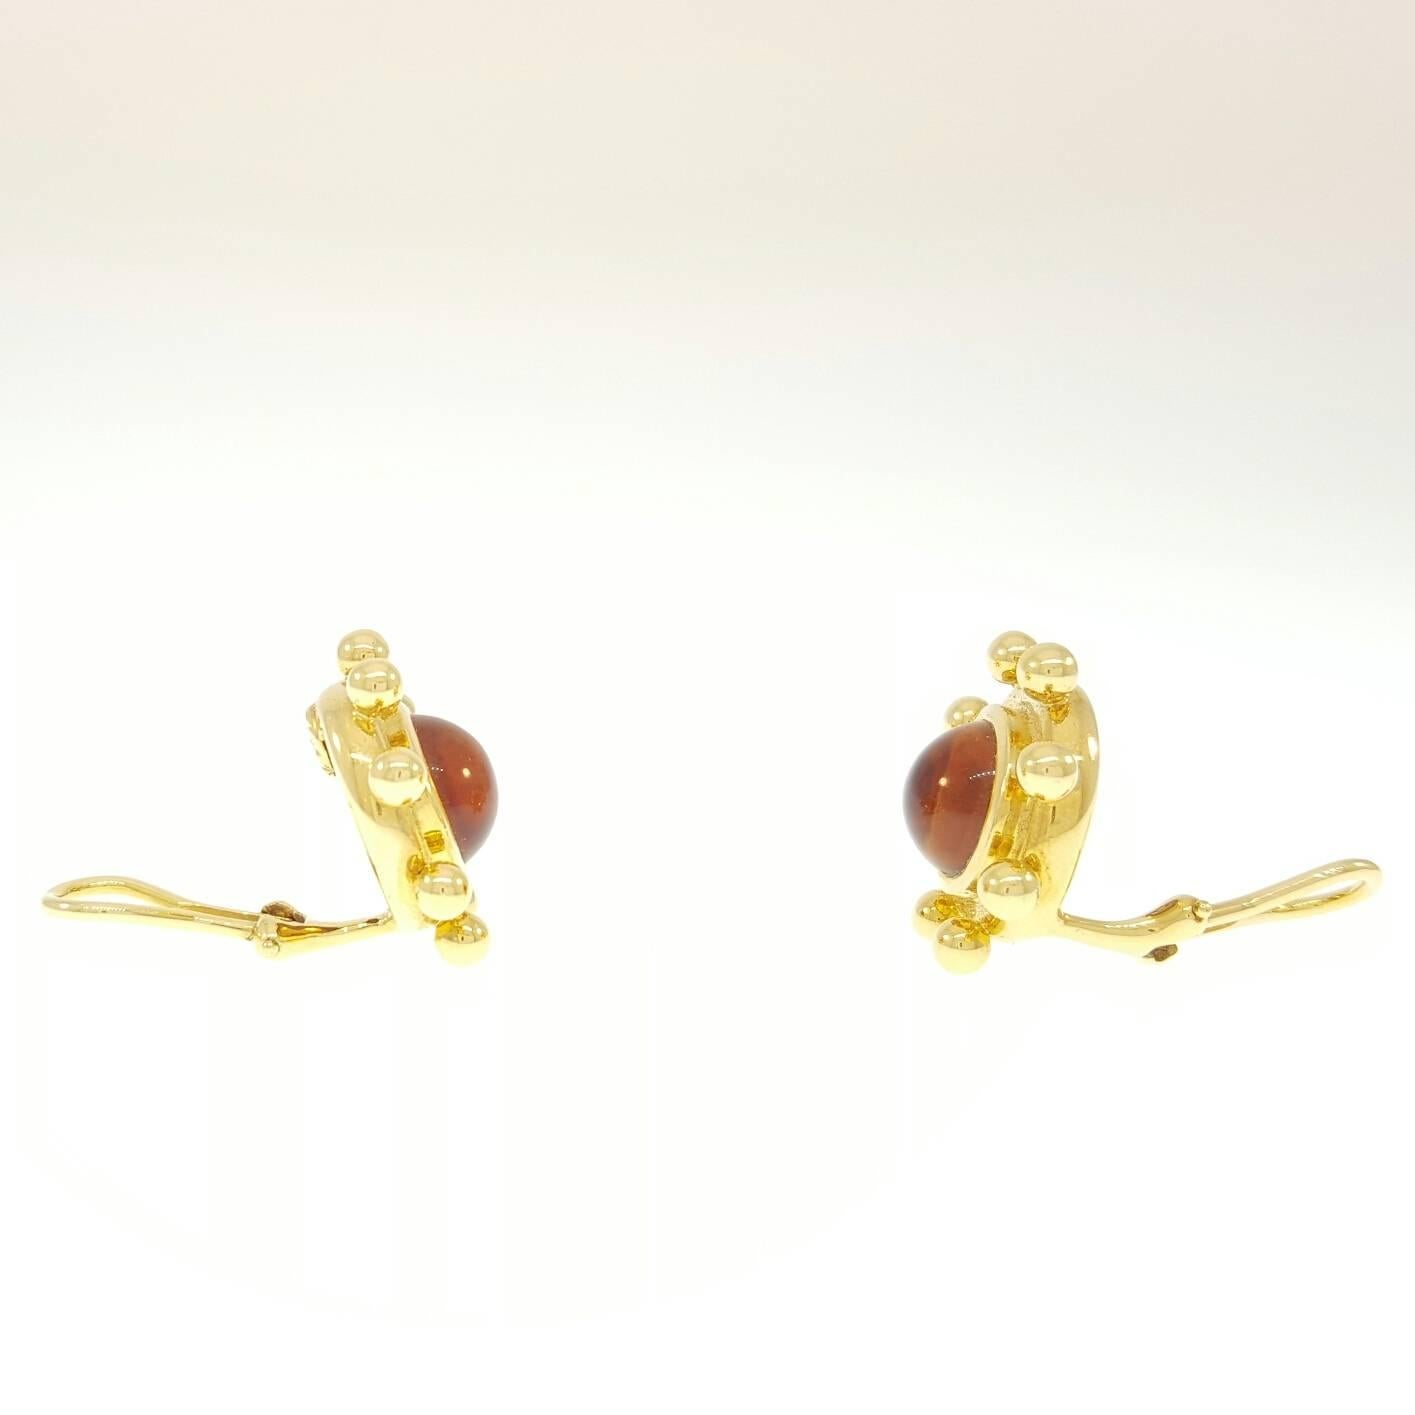 18 Karat yellow Gold and Citrine Earrings, Paloma Picasso designed, Tiffany & Co., each earring is bezel-set with a 9.5mm cabochon-cut citrine. The earrings measure 21mm in length
